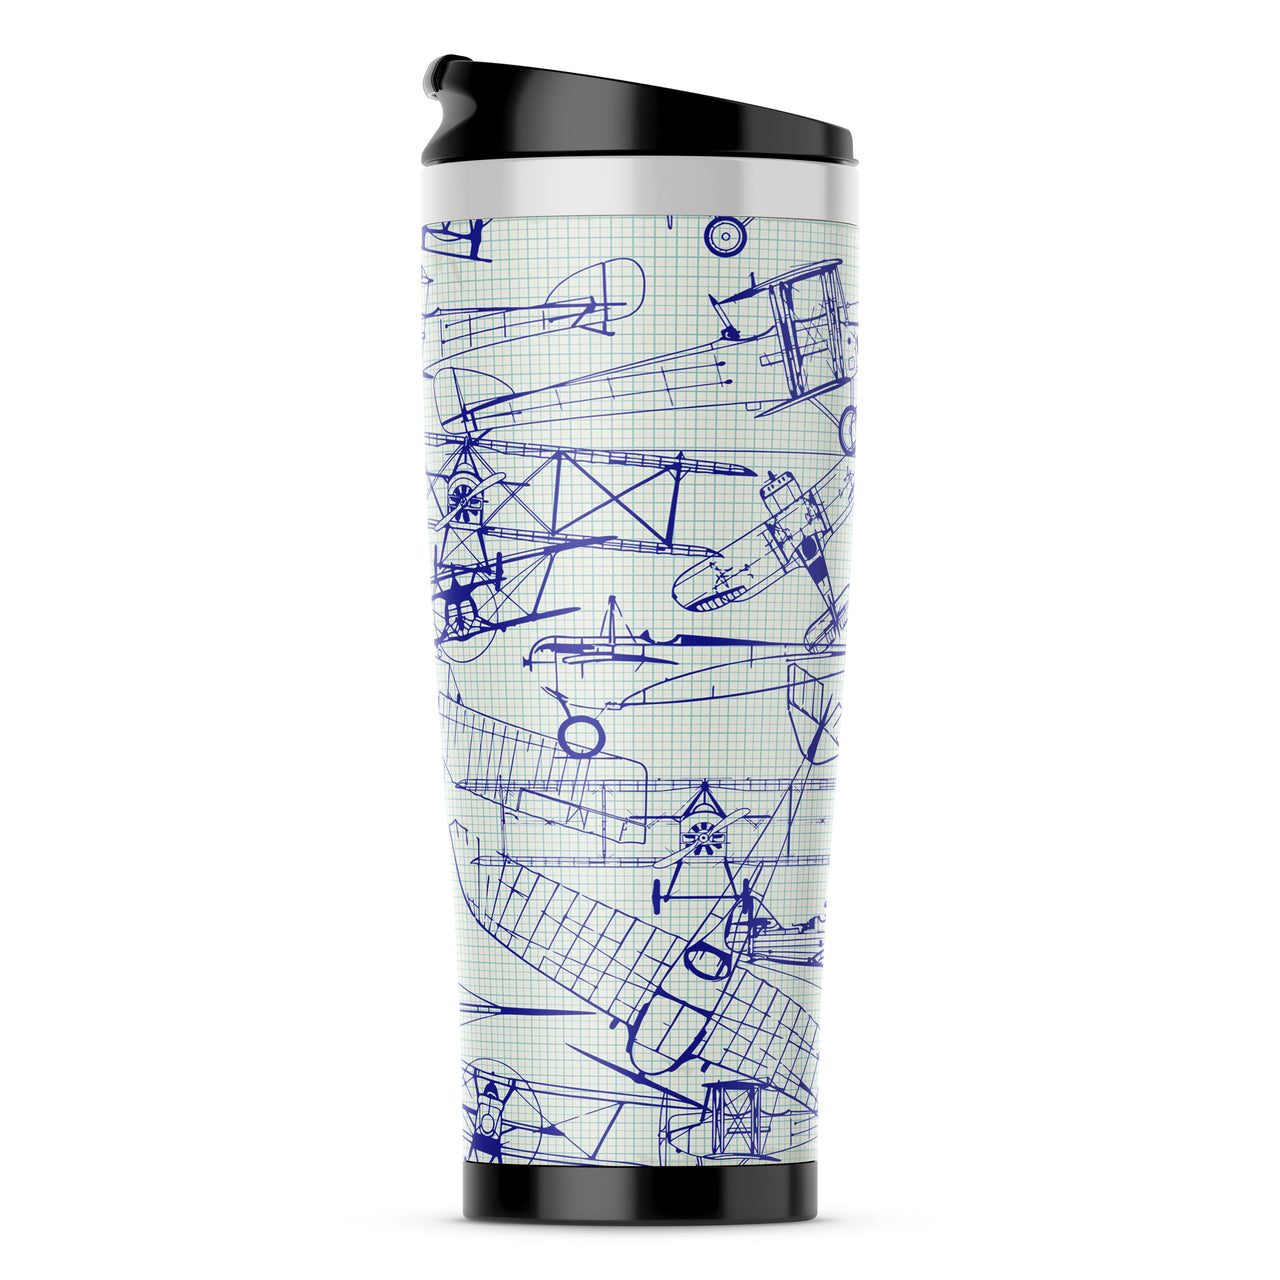 Amazing Drawings of Old Aircrafts Designed Travel Mugs